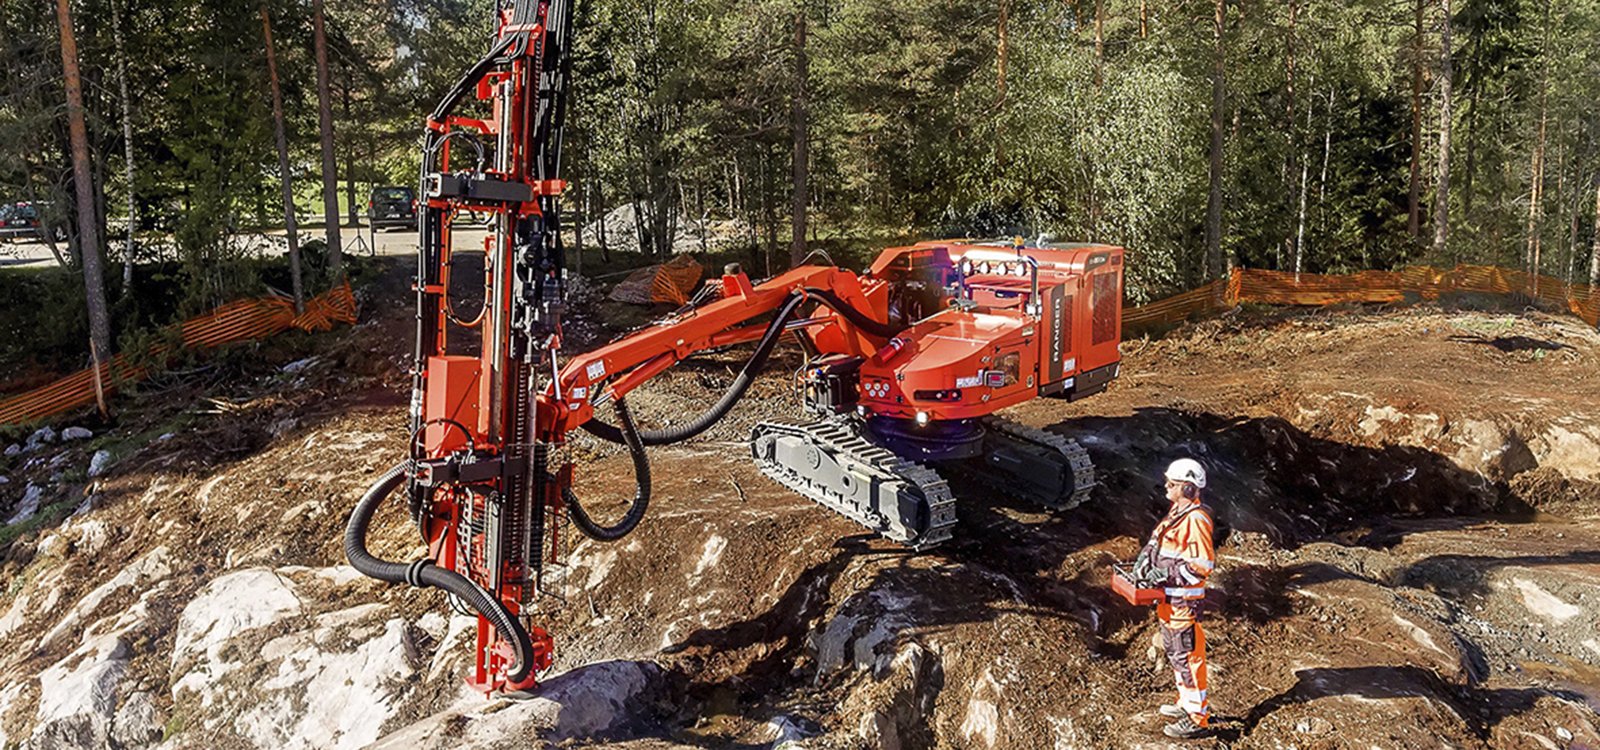 <p>The new non-cabin Ranger DXR series surface rigs offer the reliability and large drilling coverage area of the conventional Ranger DX series drill rigs, in a lighter and more mobile package.</p>